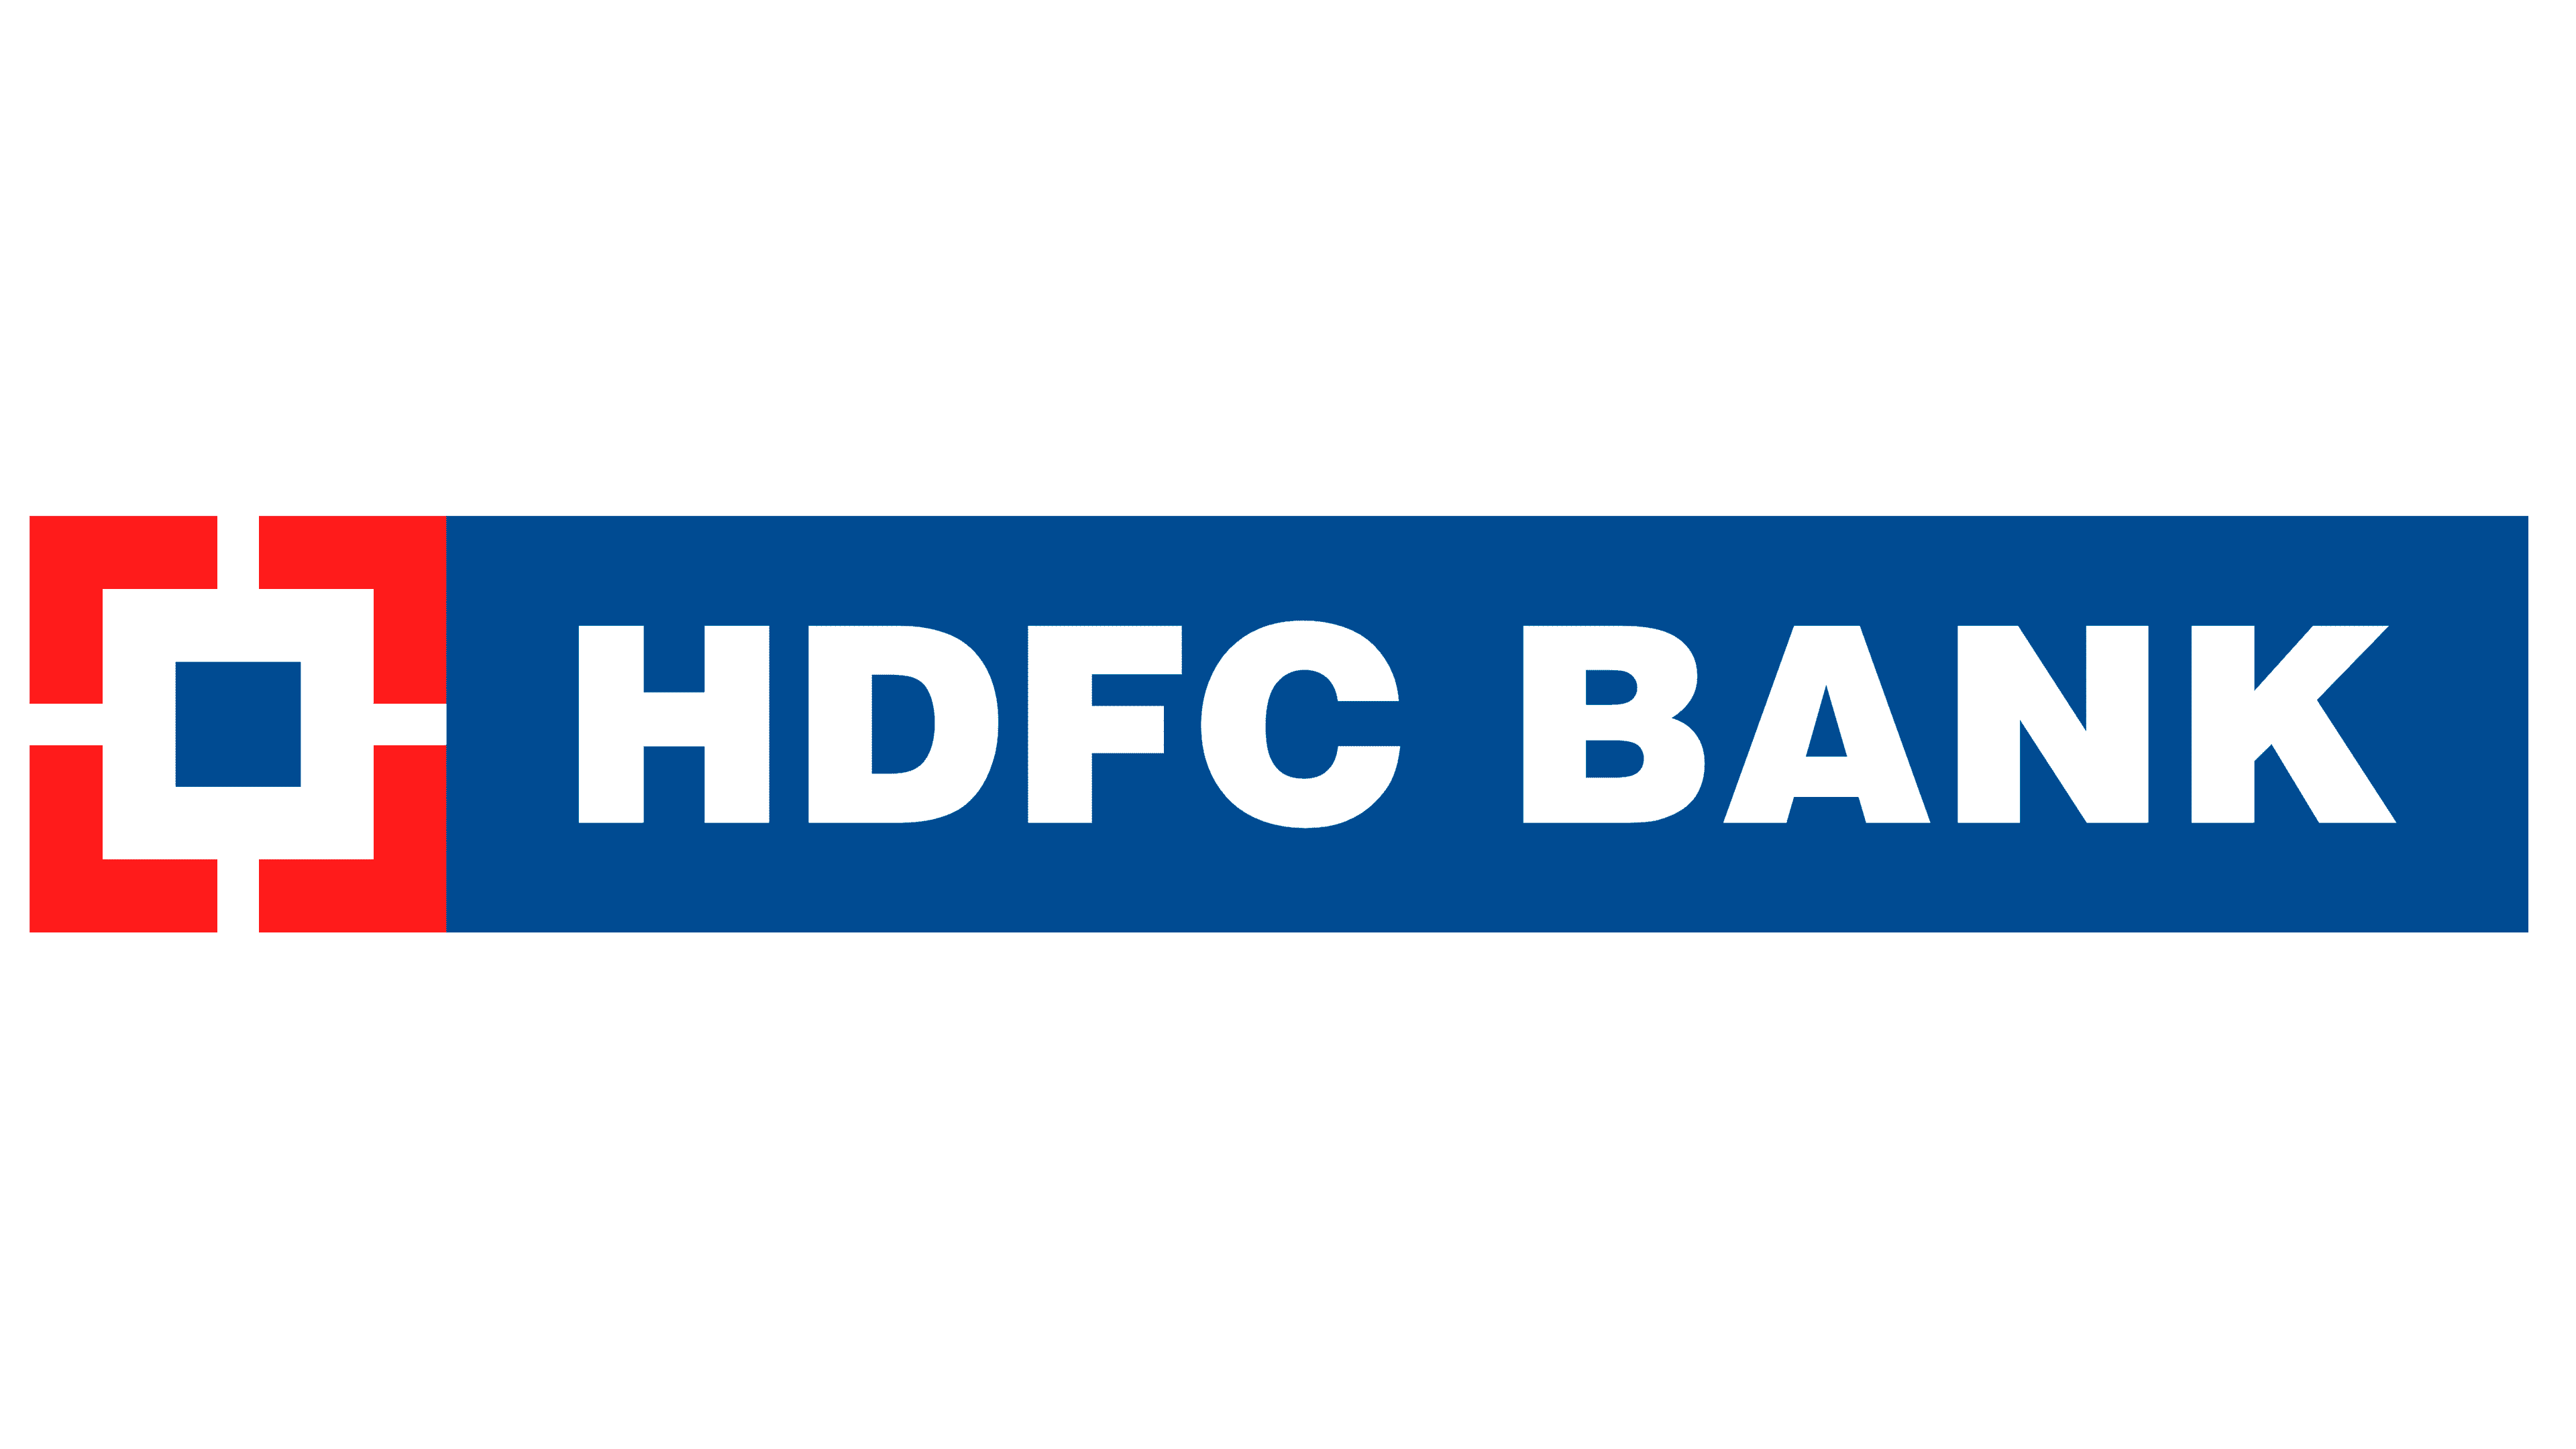 HDFC Bank Logo, symbol, meaning, history, PNG, brand